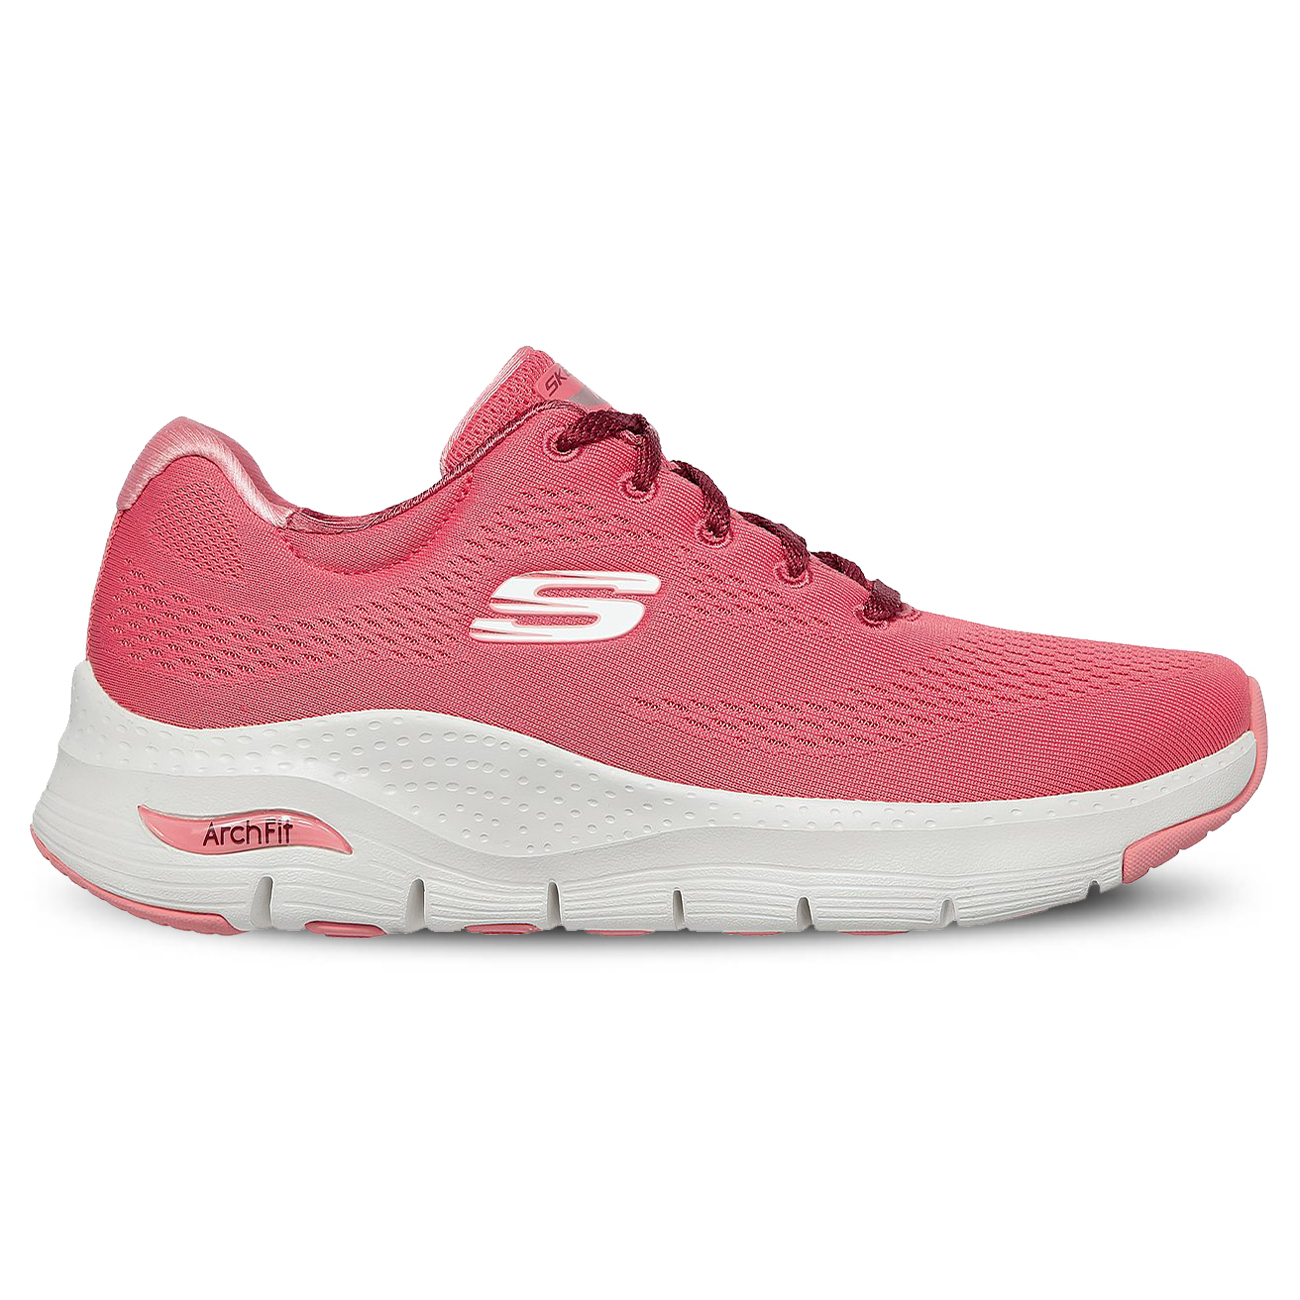 Skechers Womens Arch Fit 1